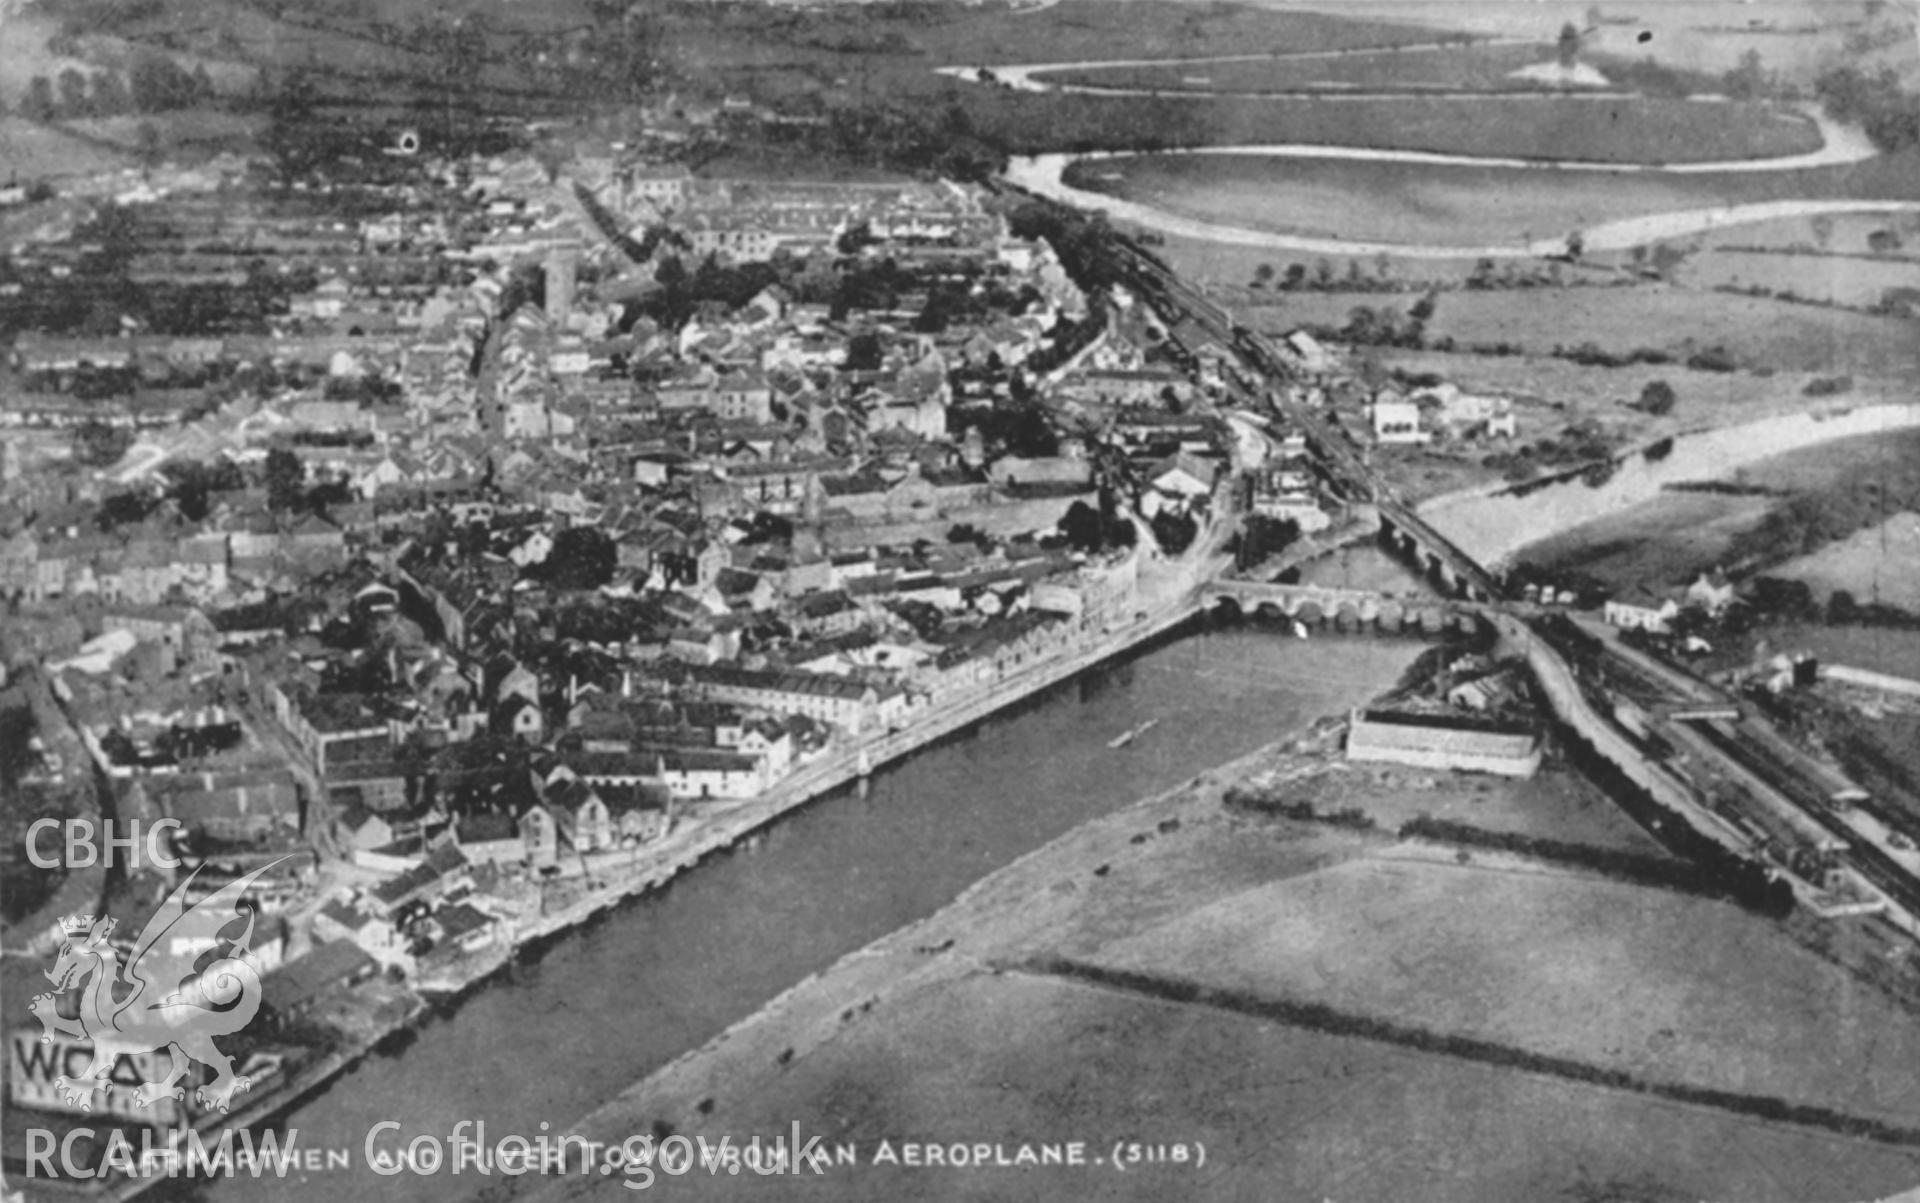 Copy of b/w postcard of view of Carmarthen and River Towy from an aeroplane, copied from original loaned by Thomas Lloyd.  Copy negative held.